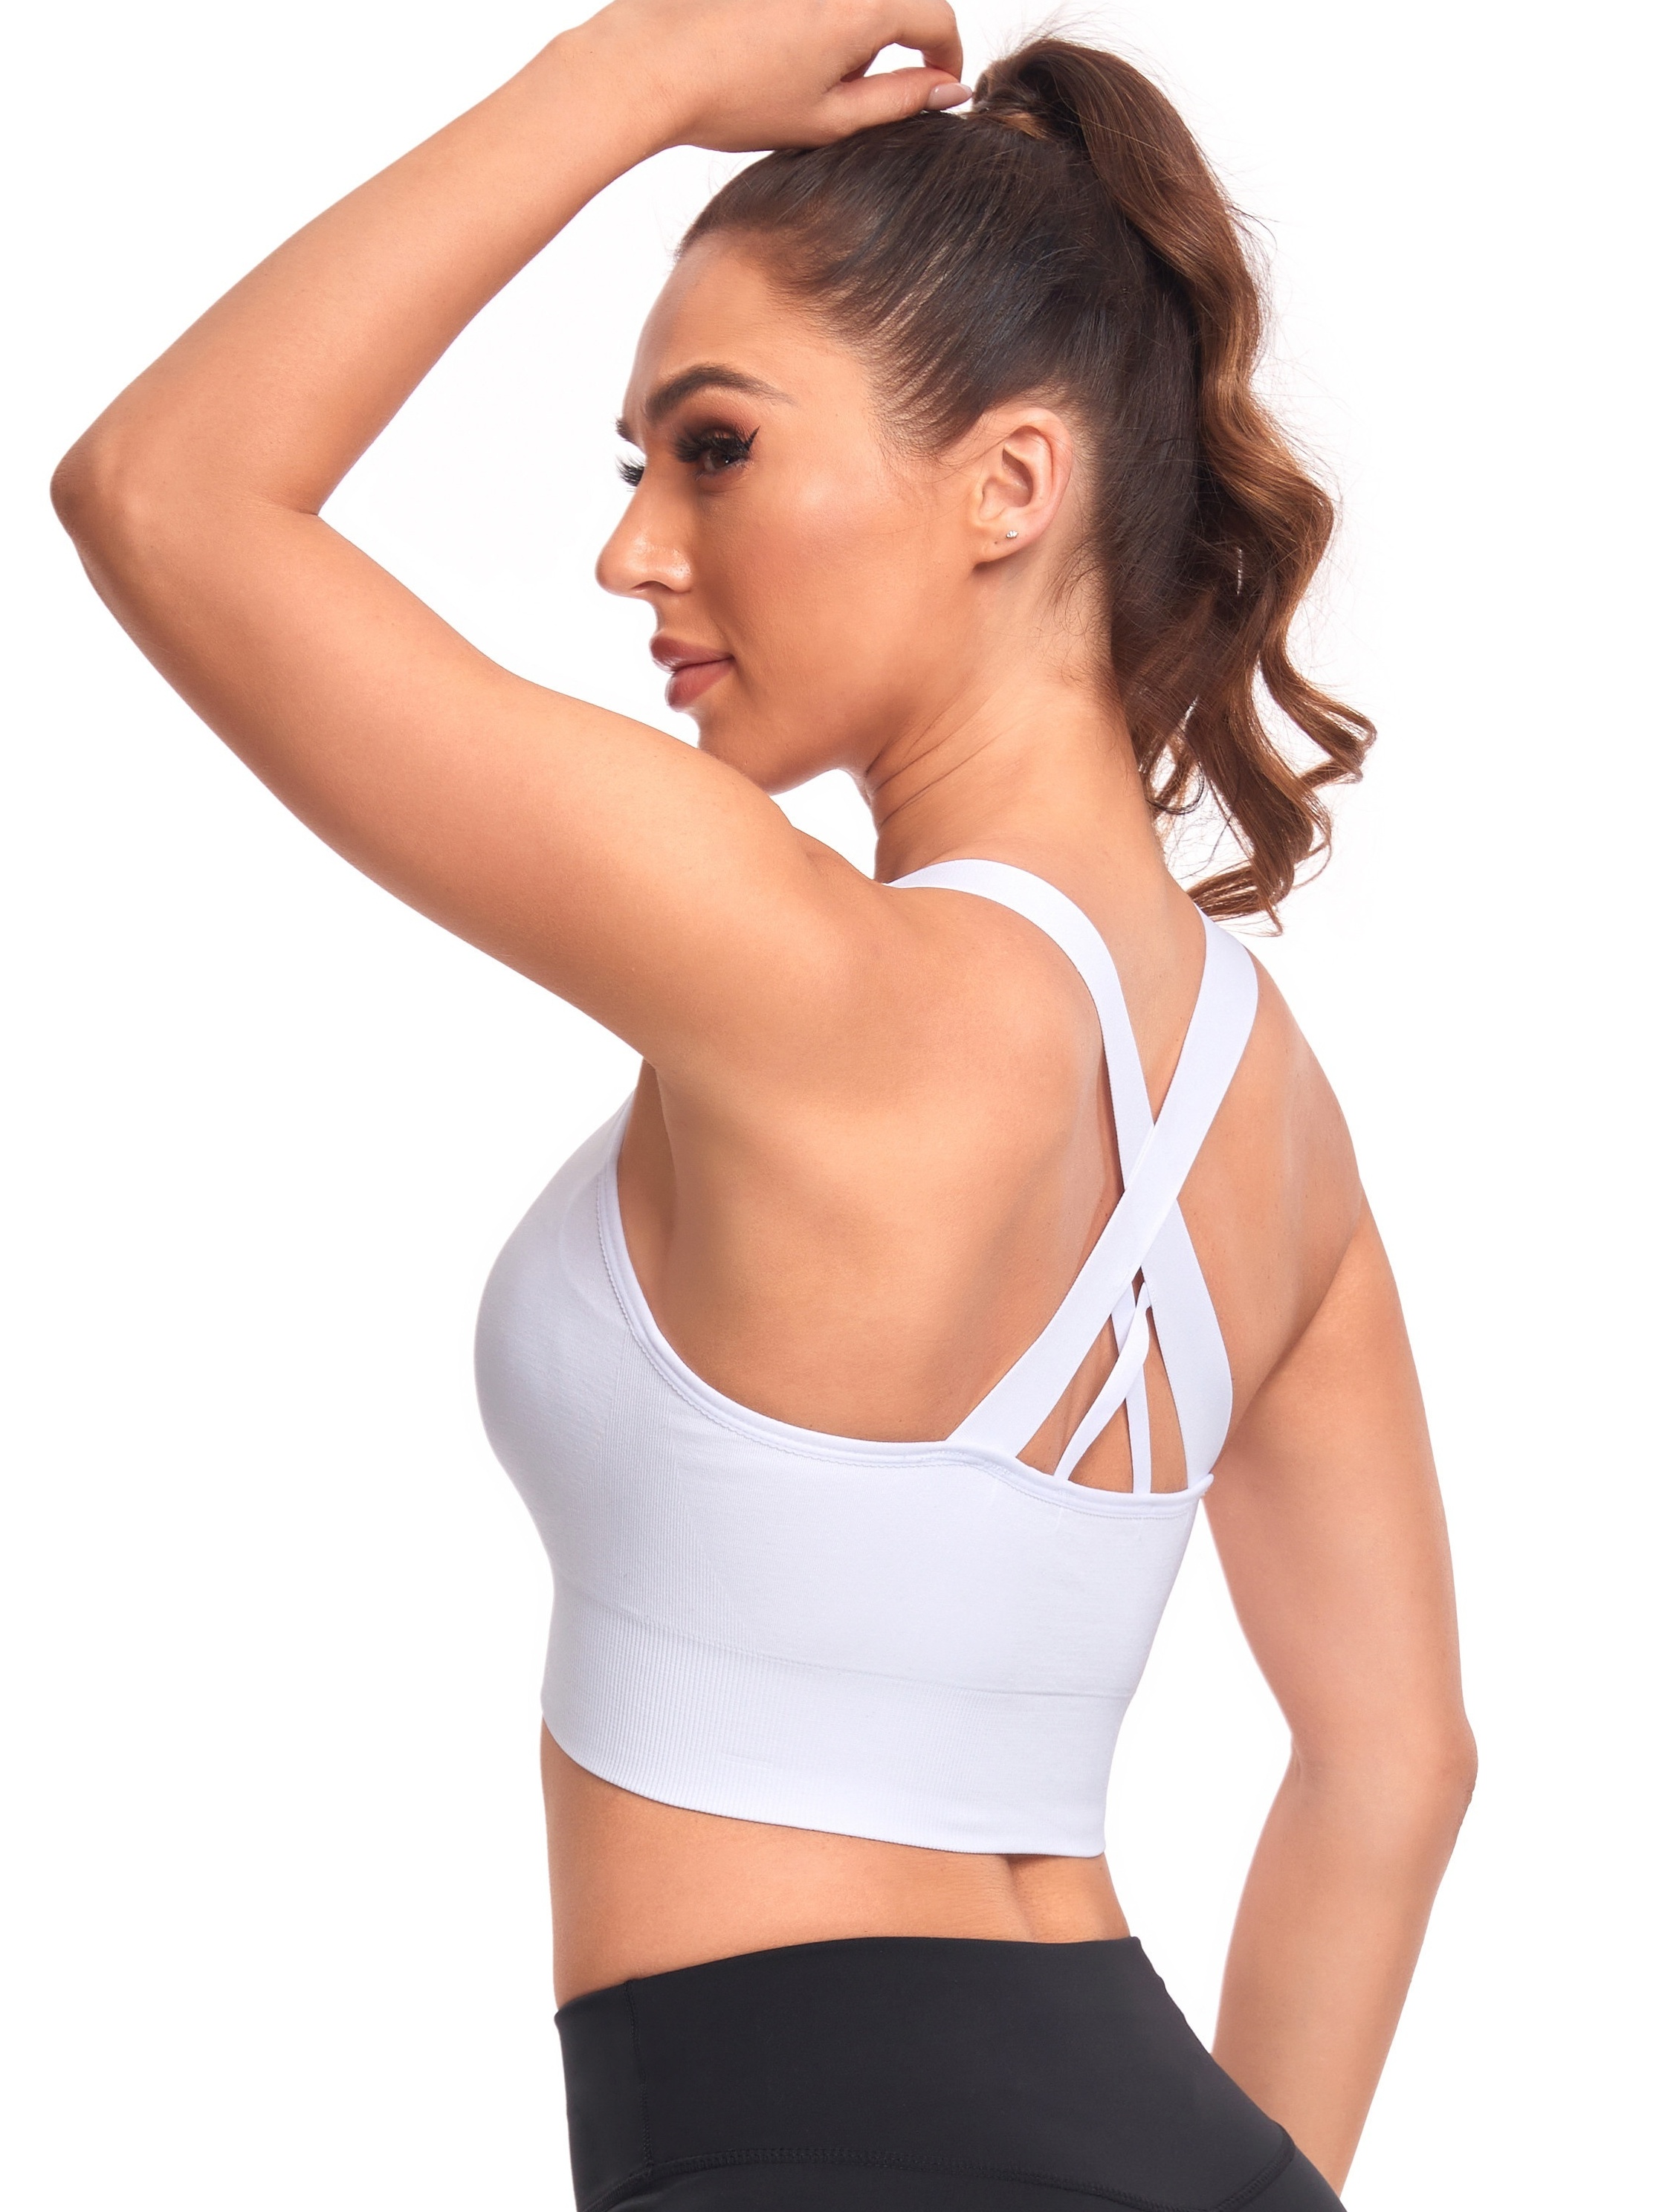 Thin Strape Yoga Sports Bra, Breathable Comfortable Workout Top